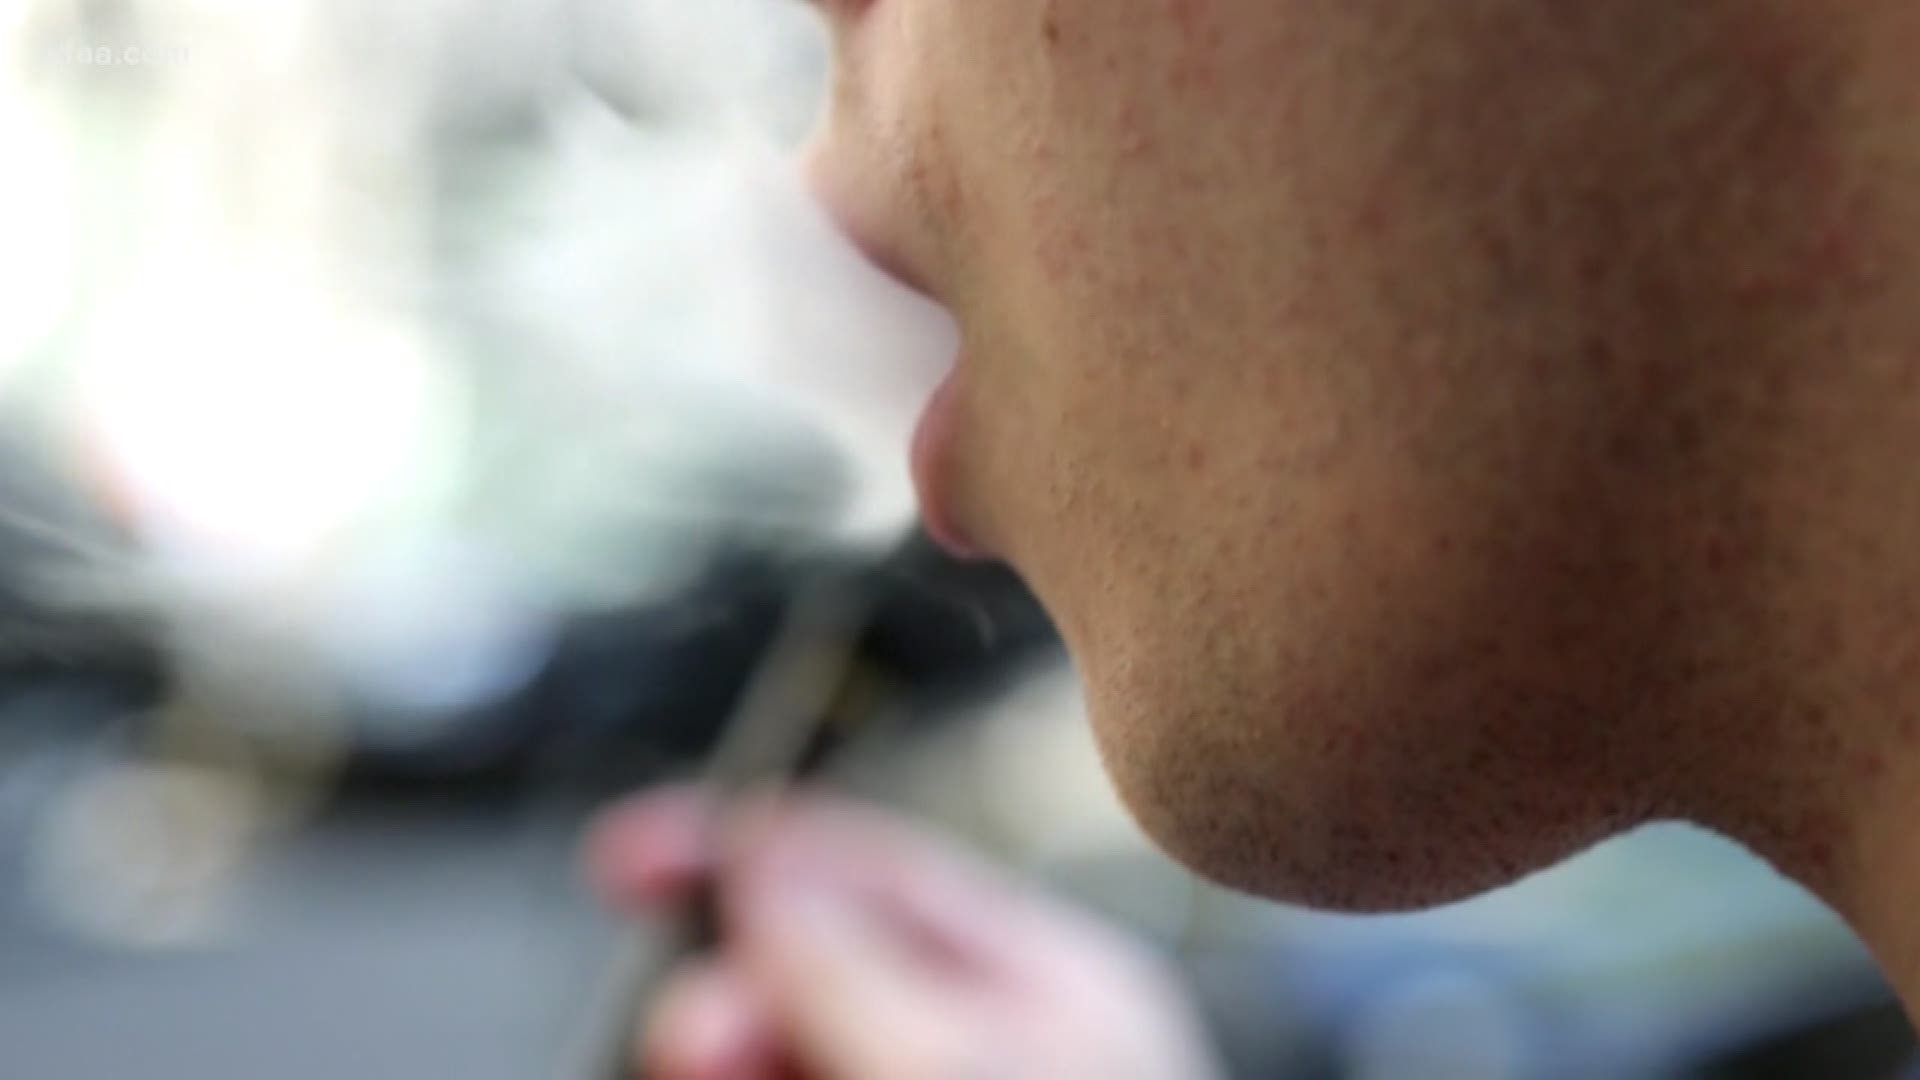 The CDC said the majority of people who have become ill are healthy young men. They say people should consider not vaping or using any sort of e-cigarette device.